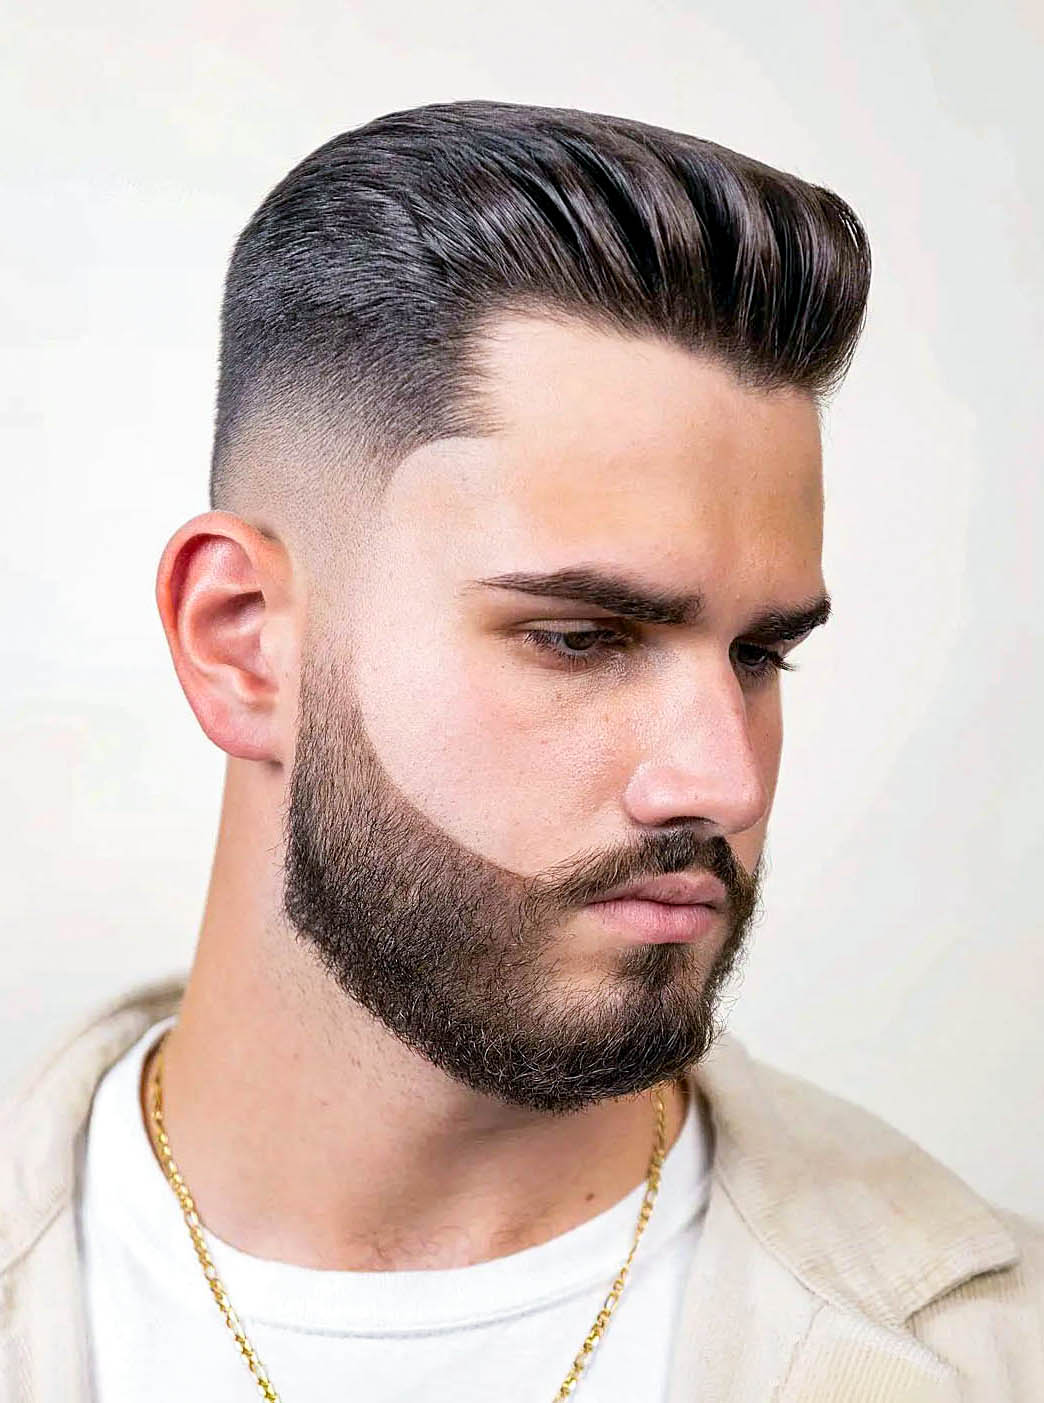 Top 20 Elegant Haircuts for Guys With Square Faces | Haircut ...